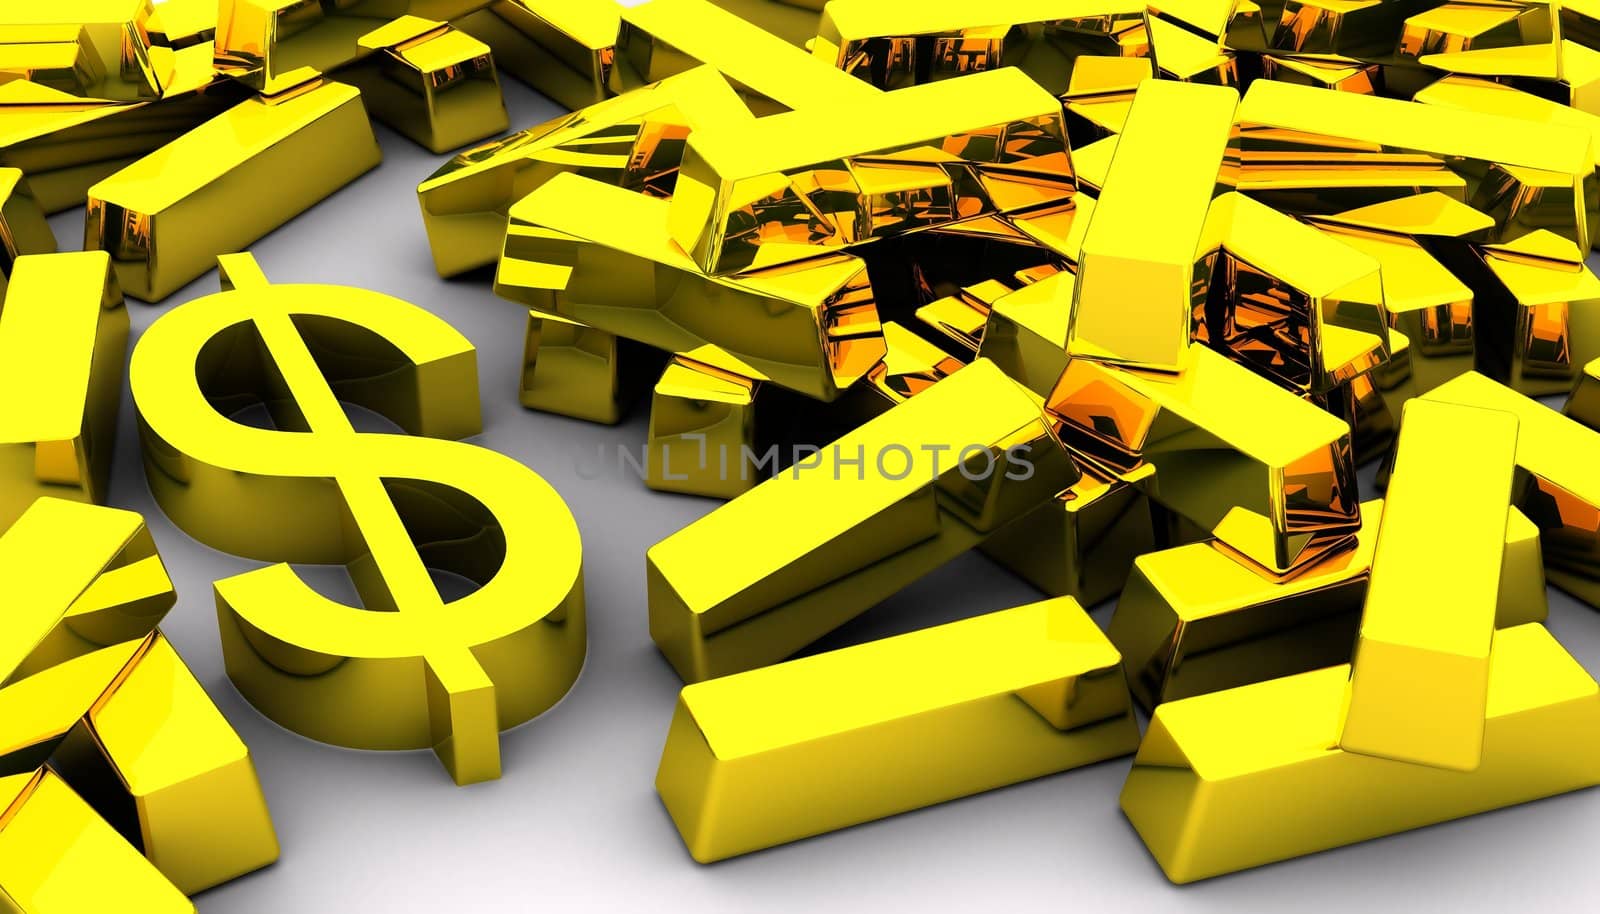 Concept of gold bars and golden dollar symbol on white background.